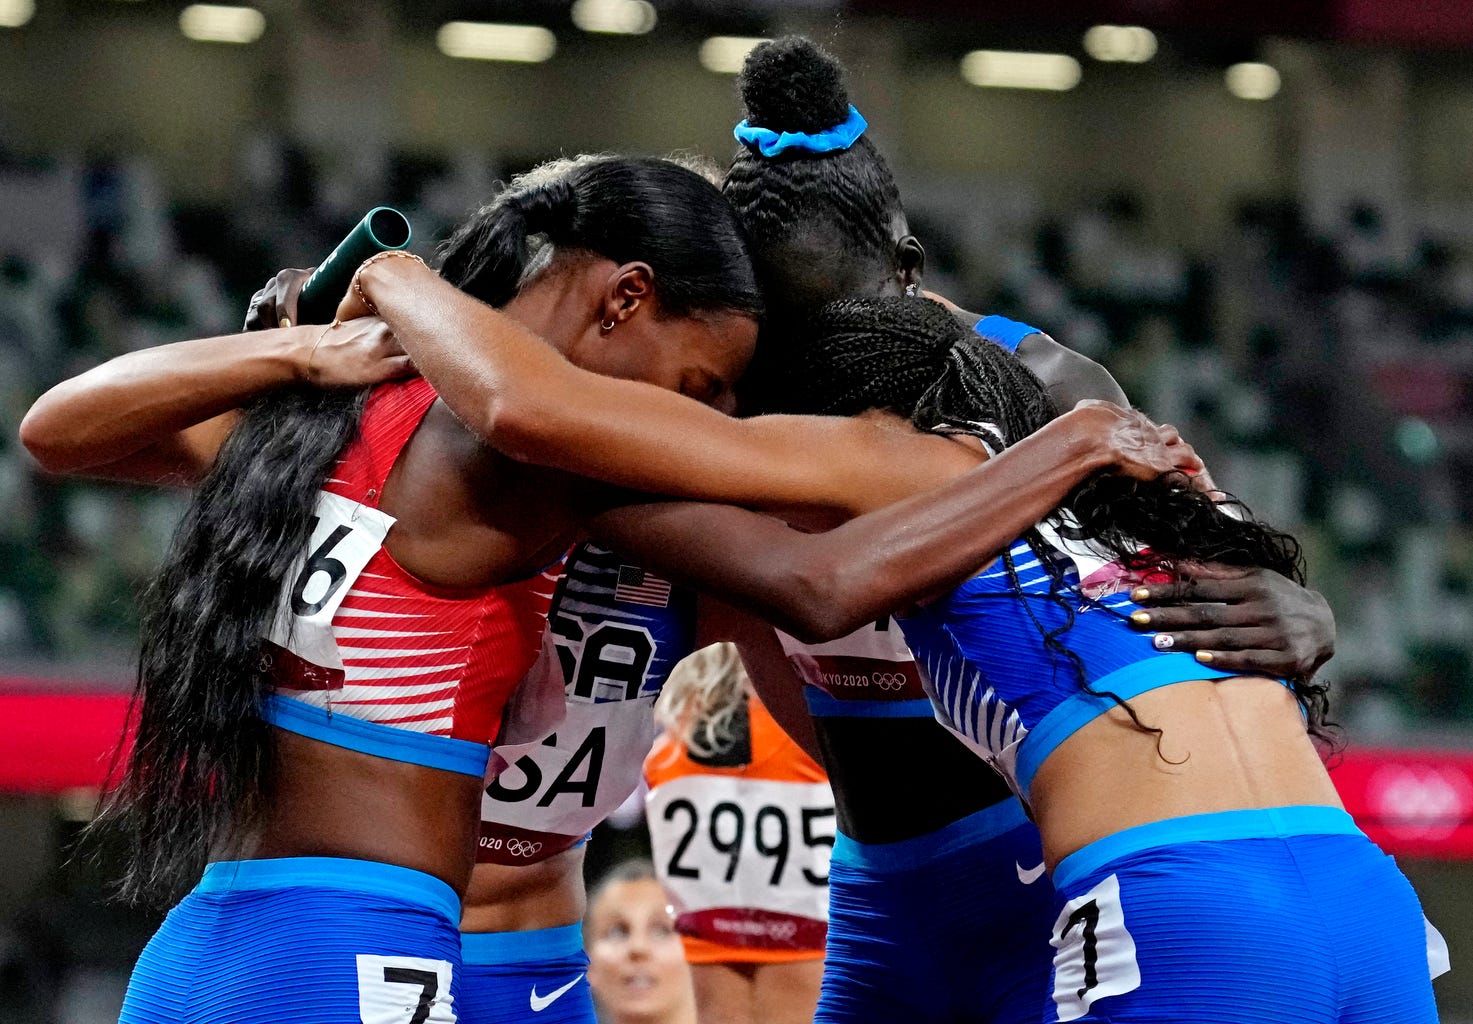 Allyson Felix wins record 11th Olympic medal as US takes 4x400 relay